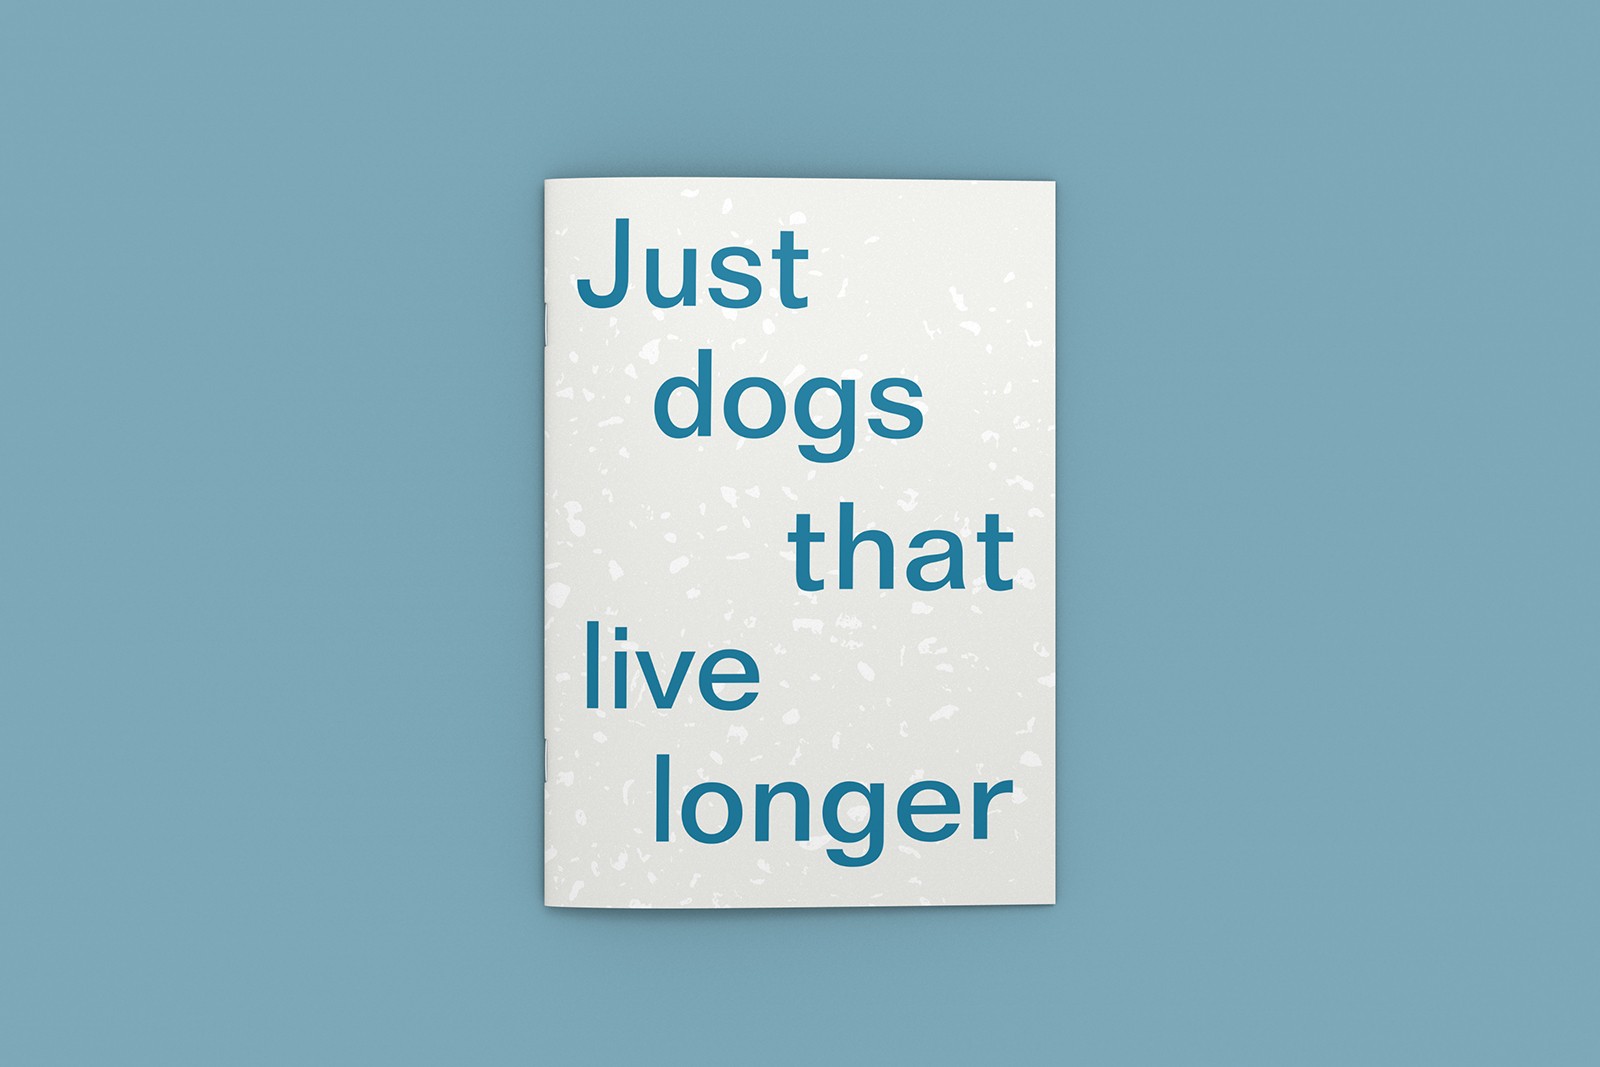 Just dogs that live longer